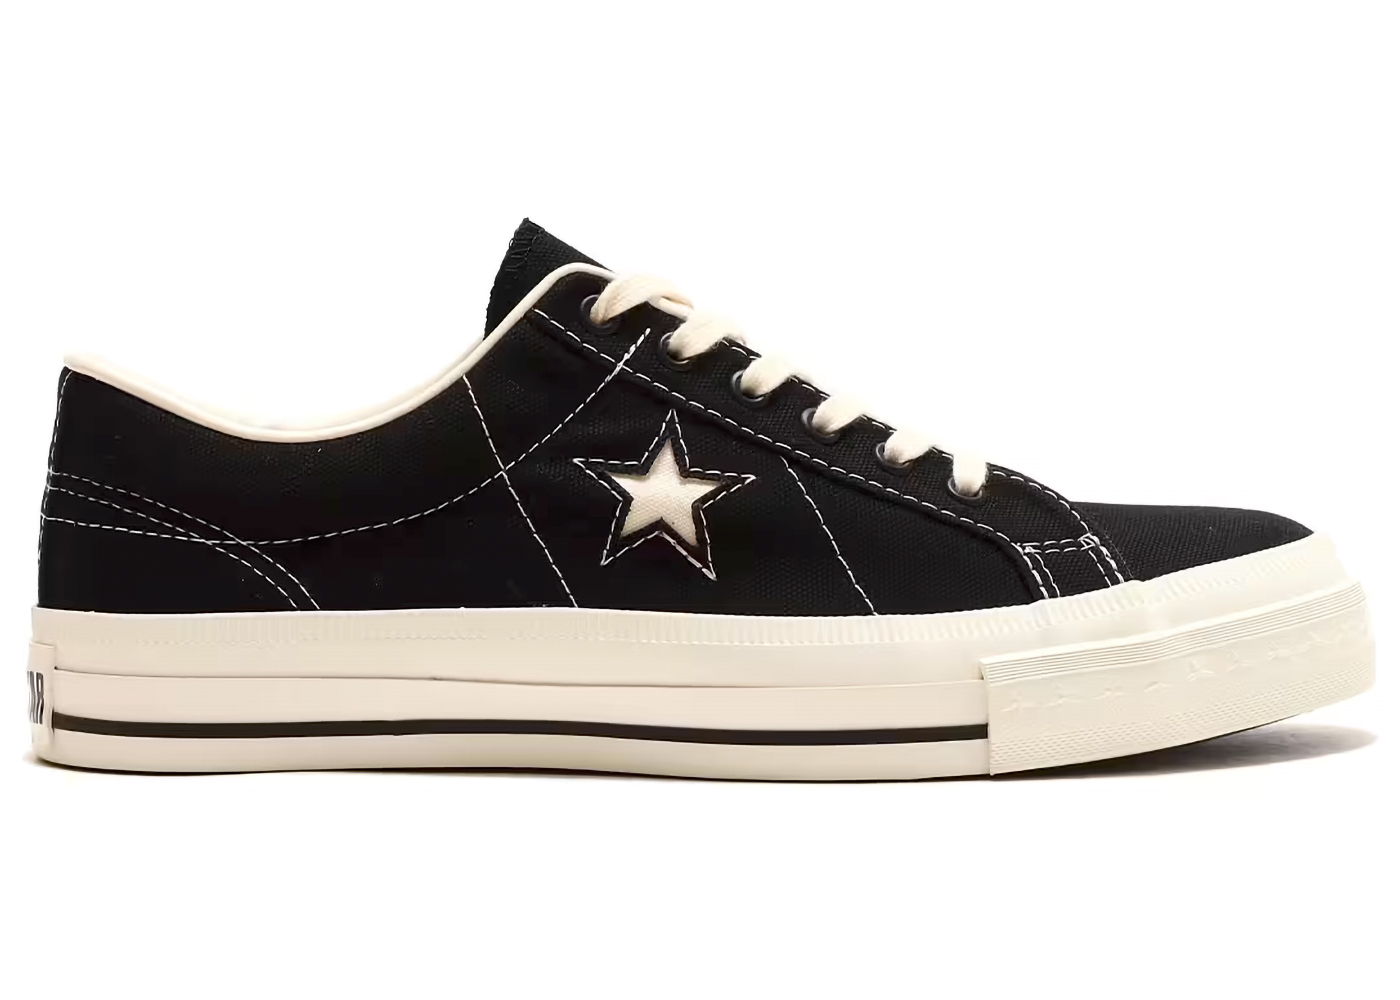 Converse One Star Made in Japan Vintage Canvas Black Men's